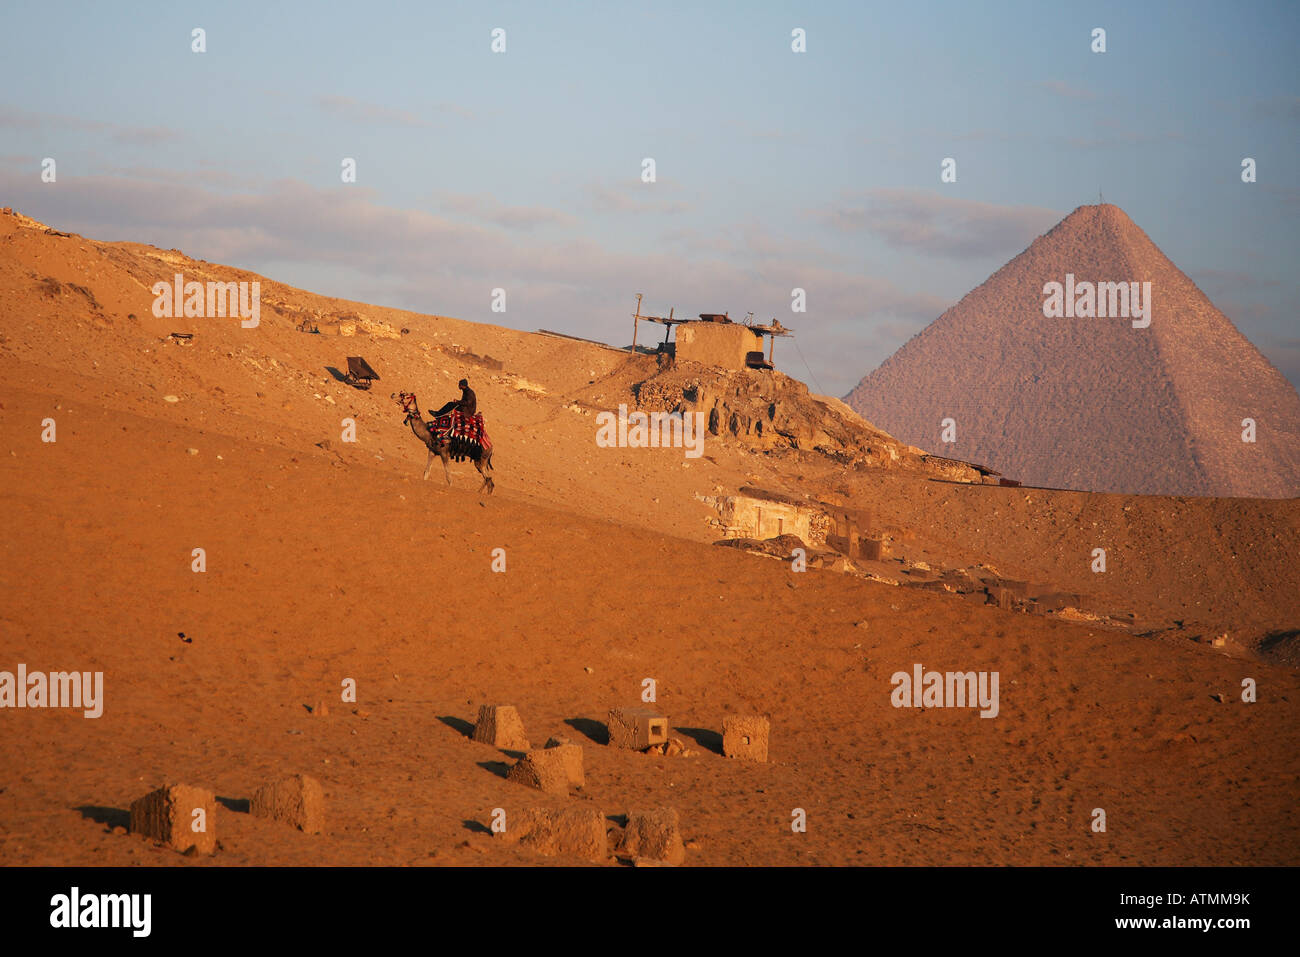 A camel rider works his way up the hill around the Pyramids, early in the morning. Stock Photo